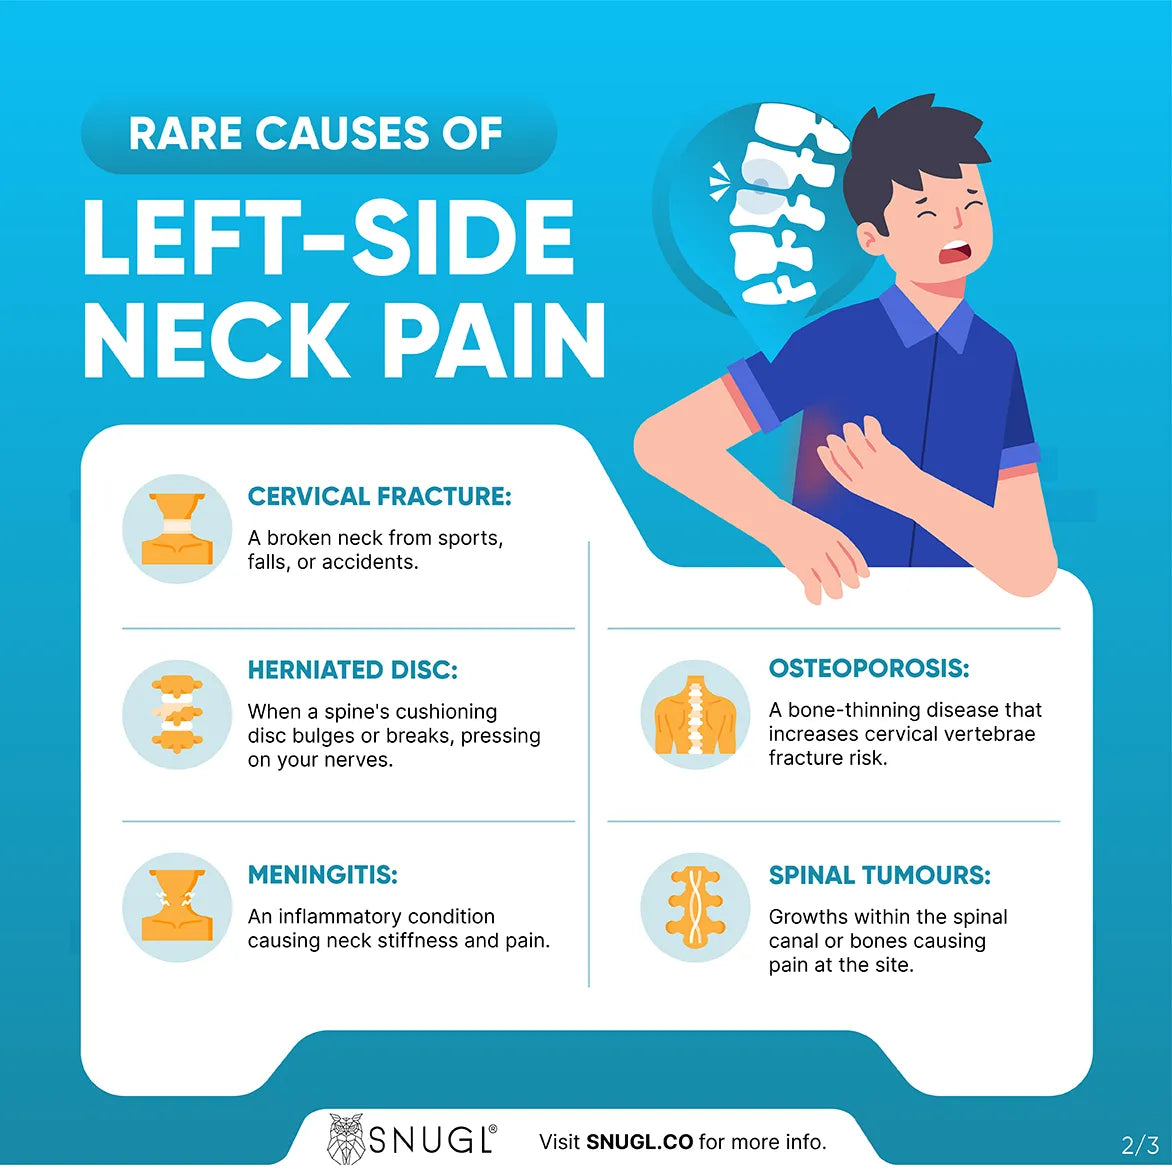 Rare causes of left-side neck pain